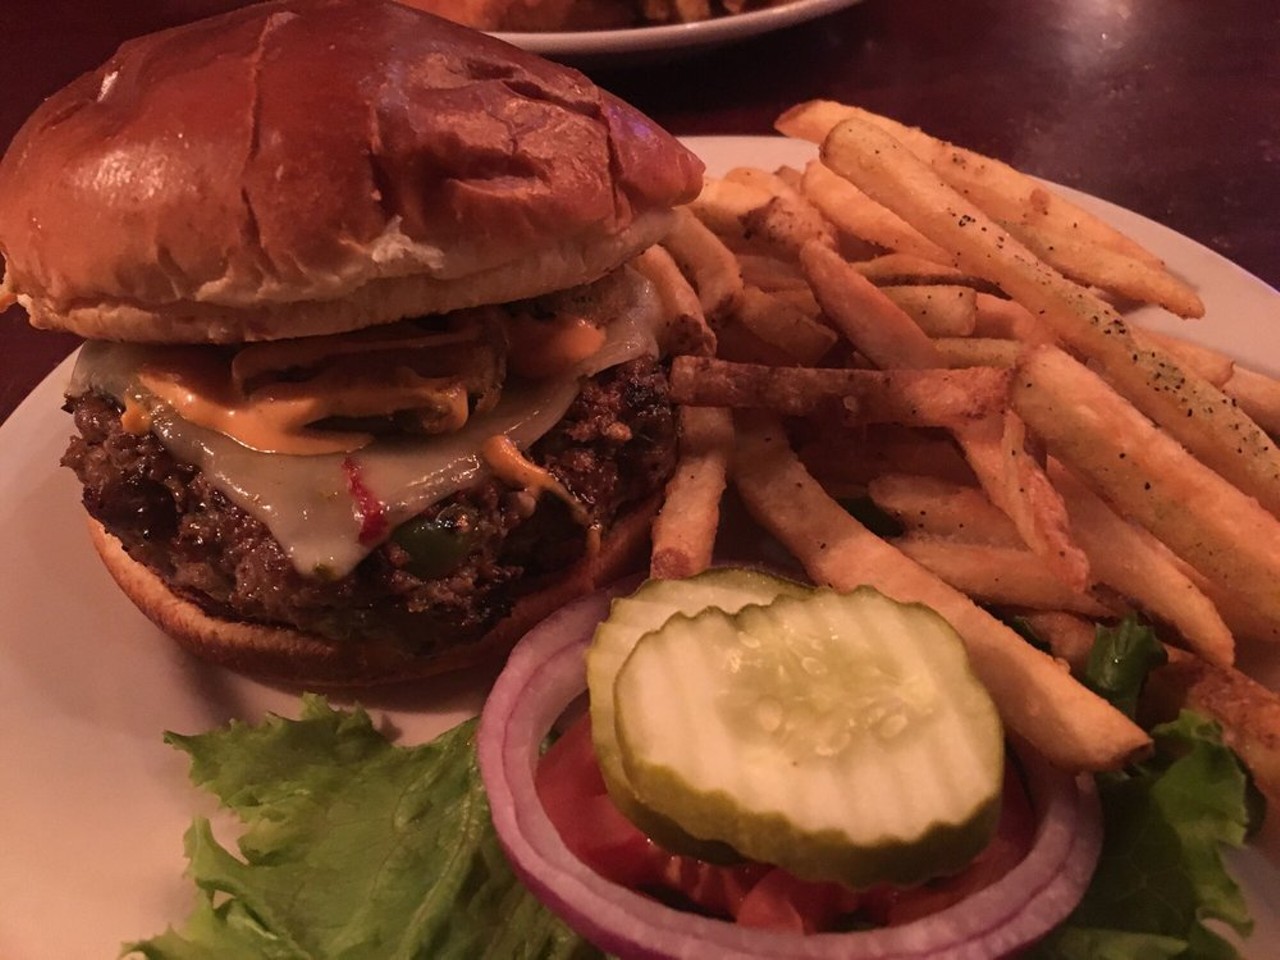 #36: Three Kings Public House
(Multiple locations, including 6307 Delmar Boulevard; 314-721-3388)
Three Kings Public House scored four stars from Yelpers &#150; read why here.
Photo credit: Jason P. via Yelp